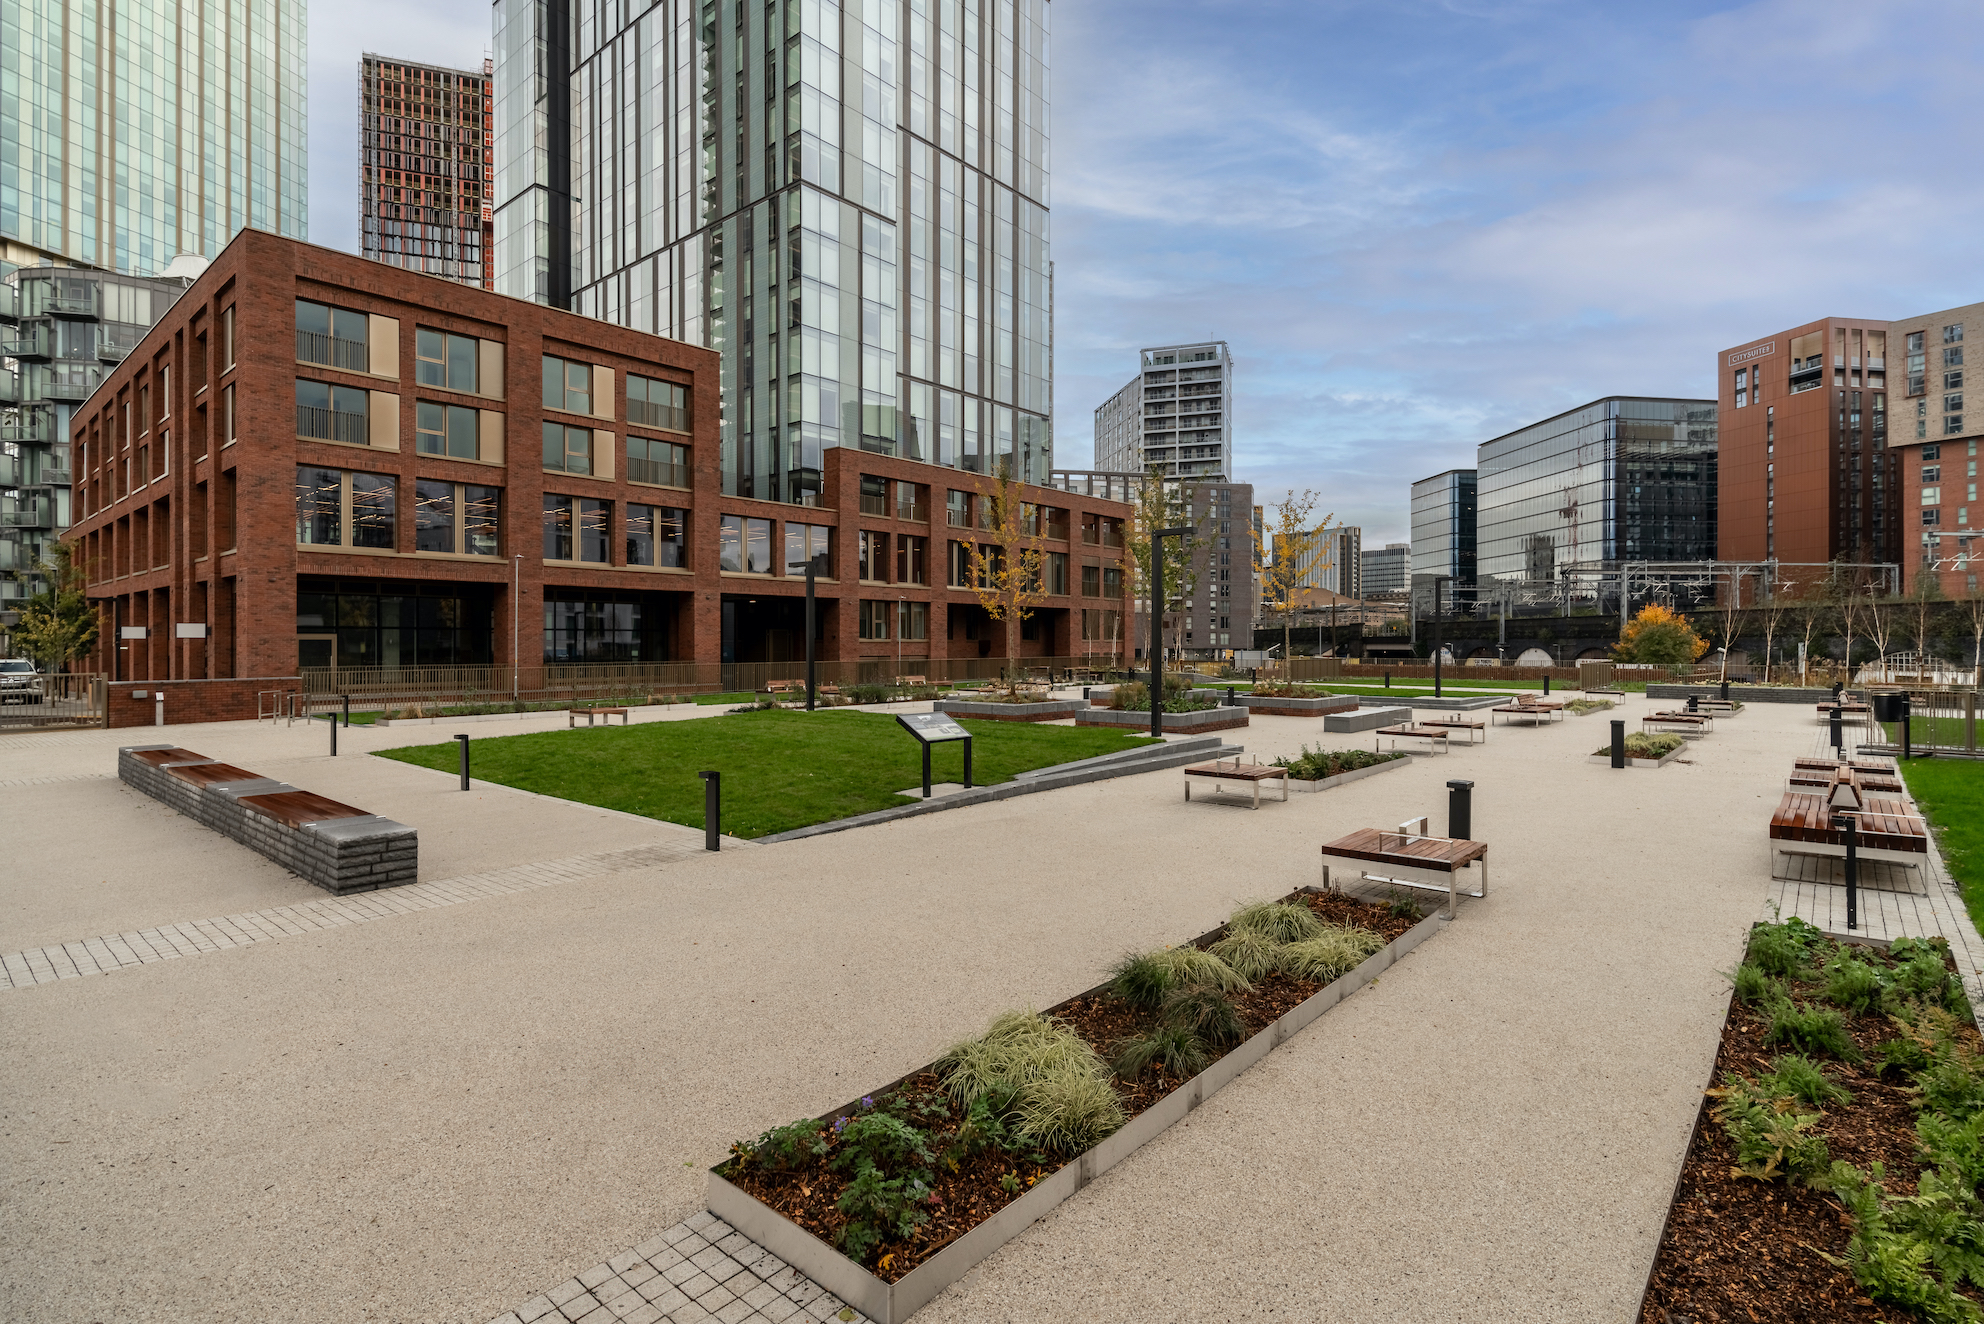 Apartments to Rent by Cortland in Cortland at Colliers Yard, Salford, M3, greengate park